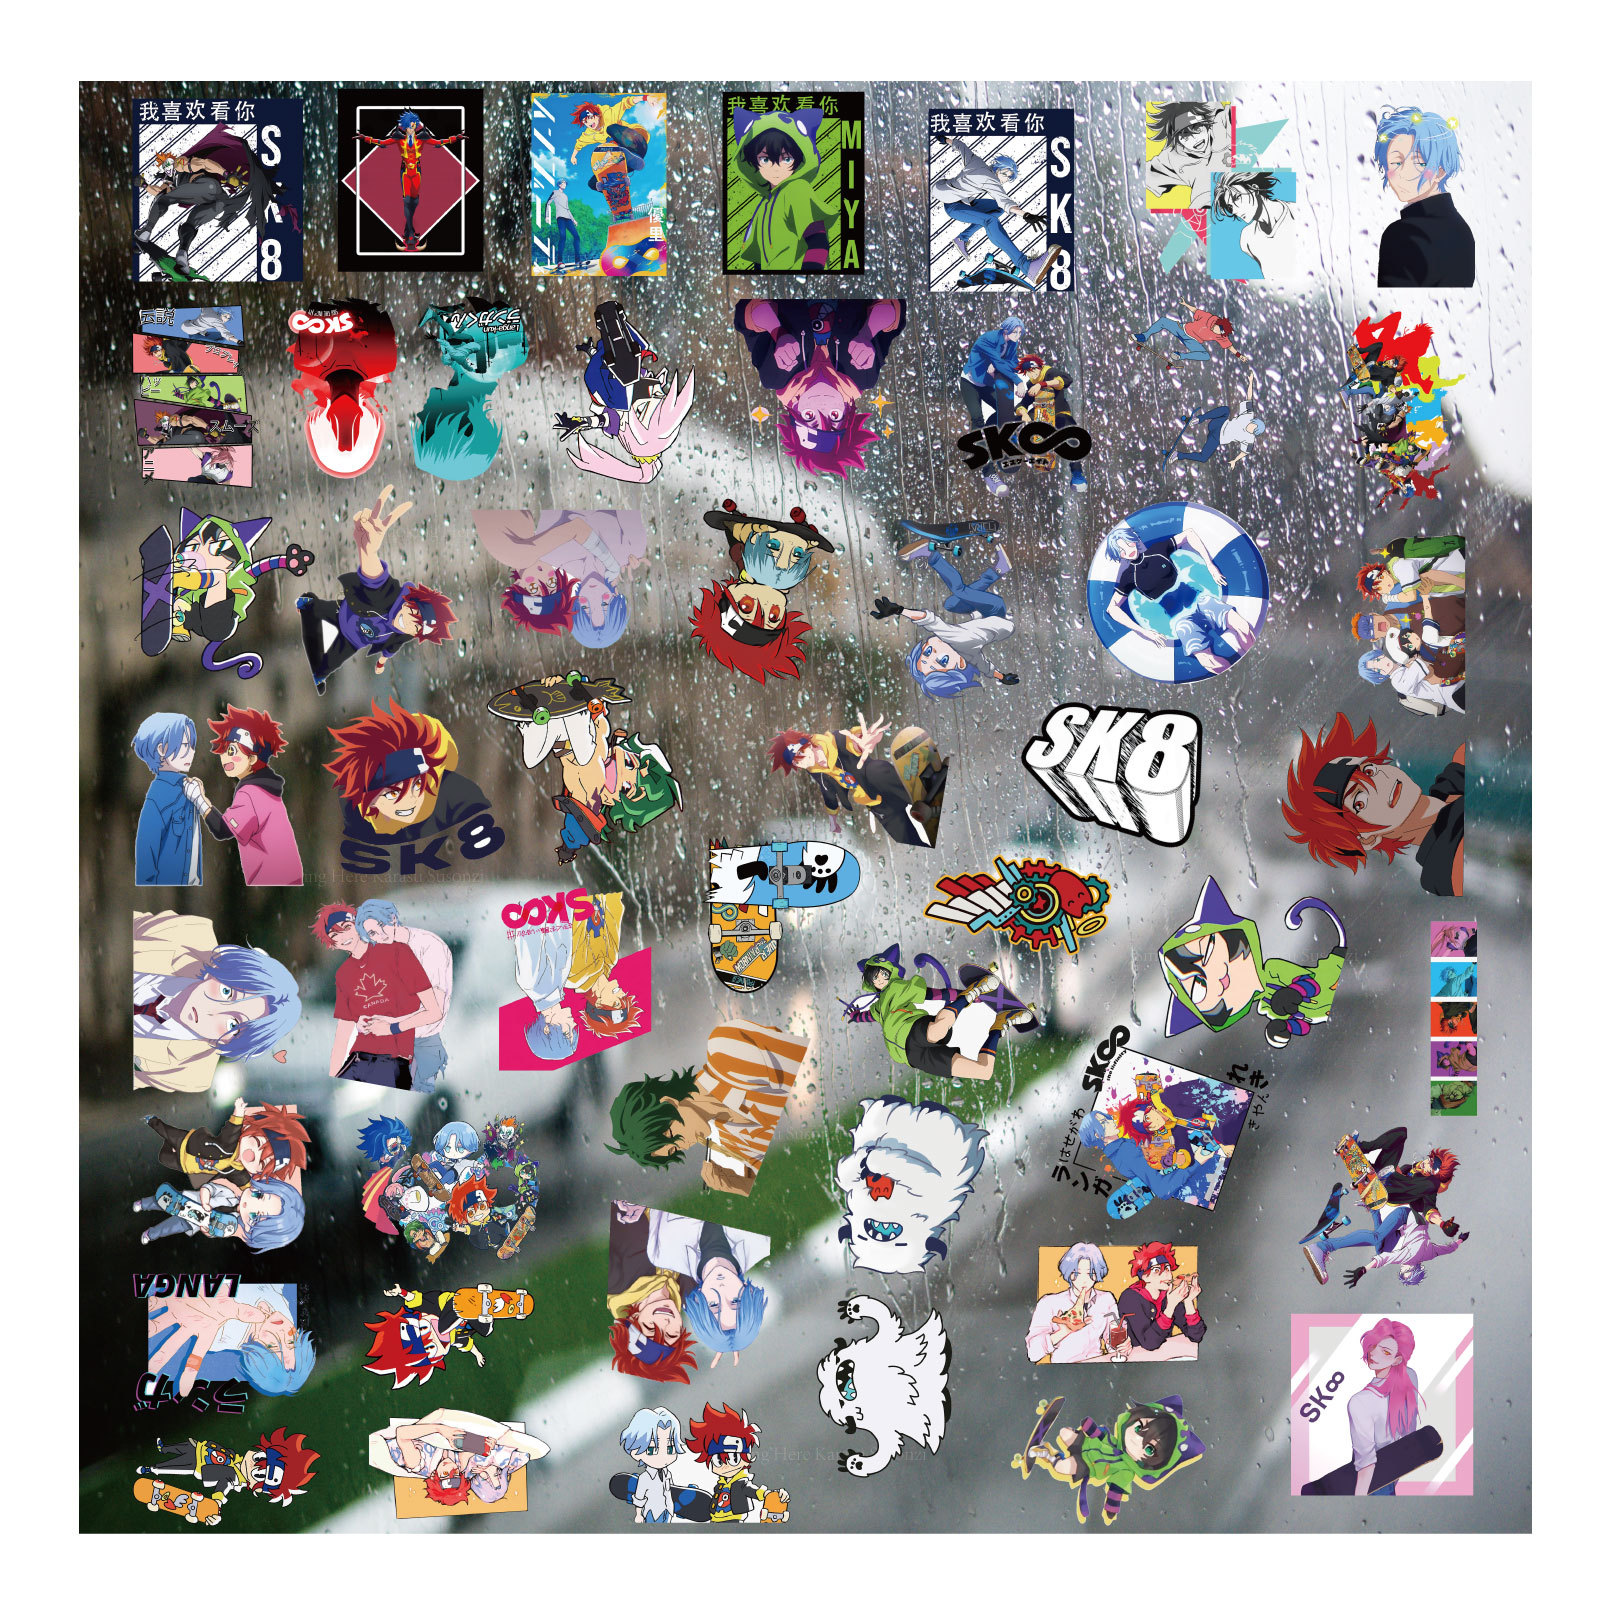 SK8 the infinity anime 3D sticker price for a set of 51 pcs